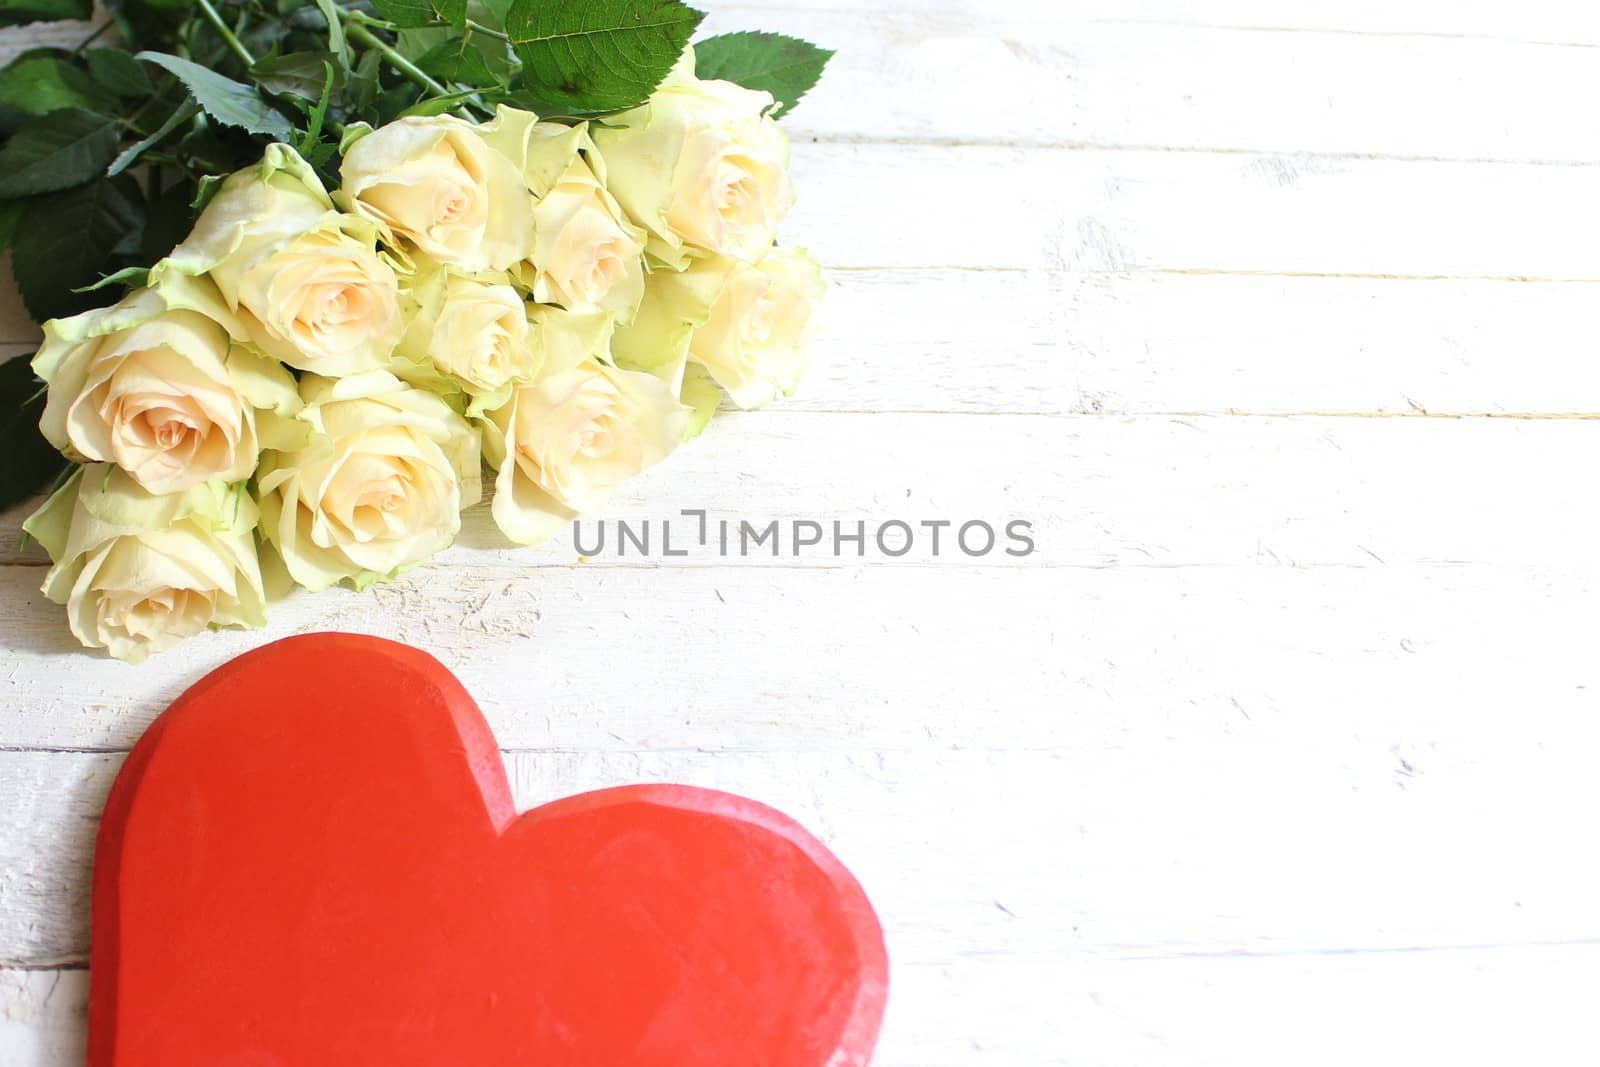 The picture shows white roses and a red heart.